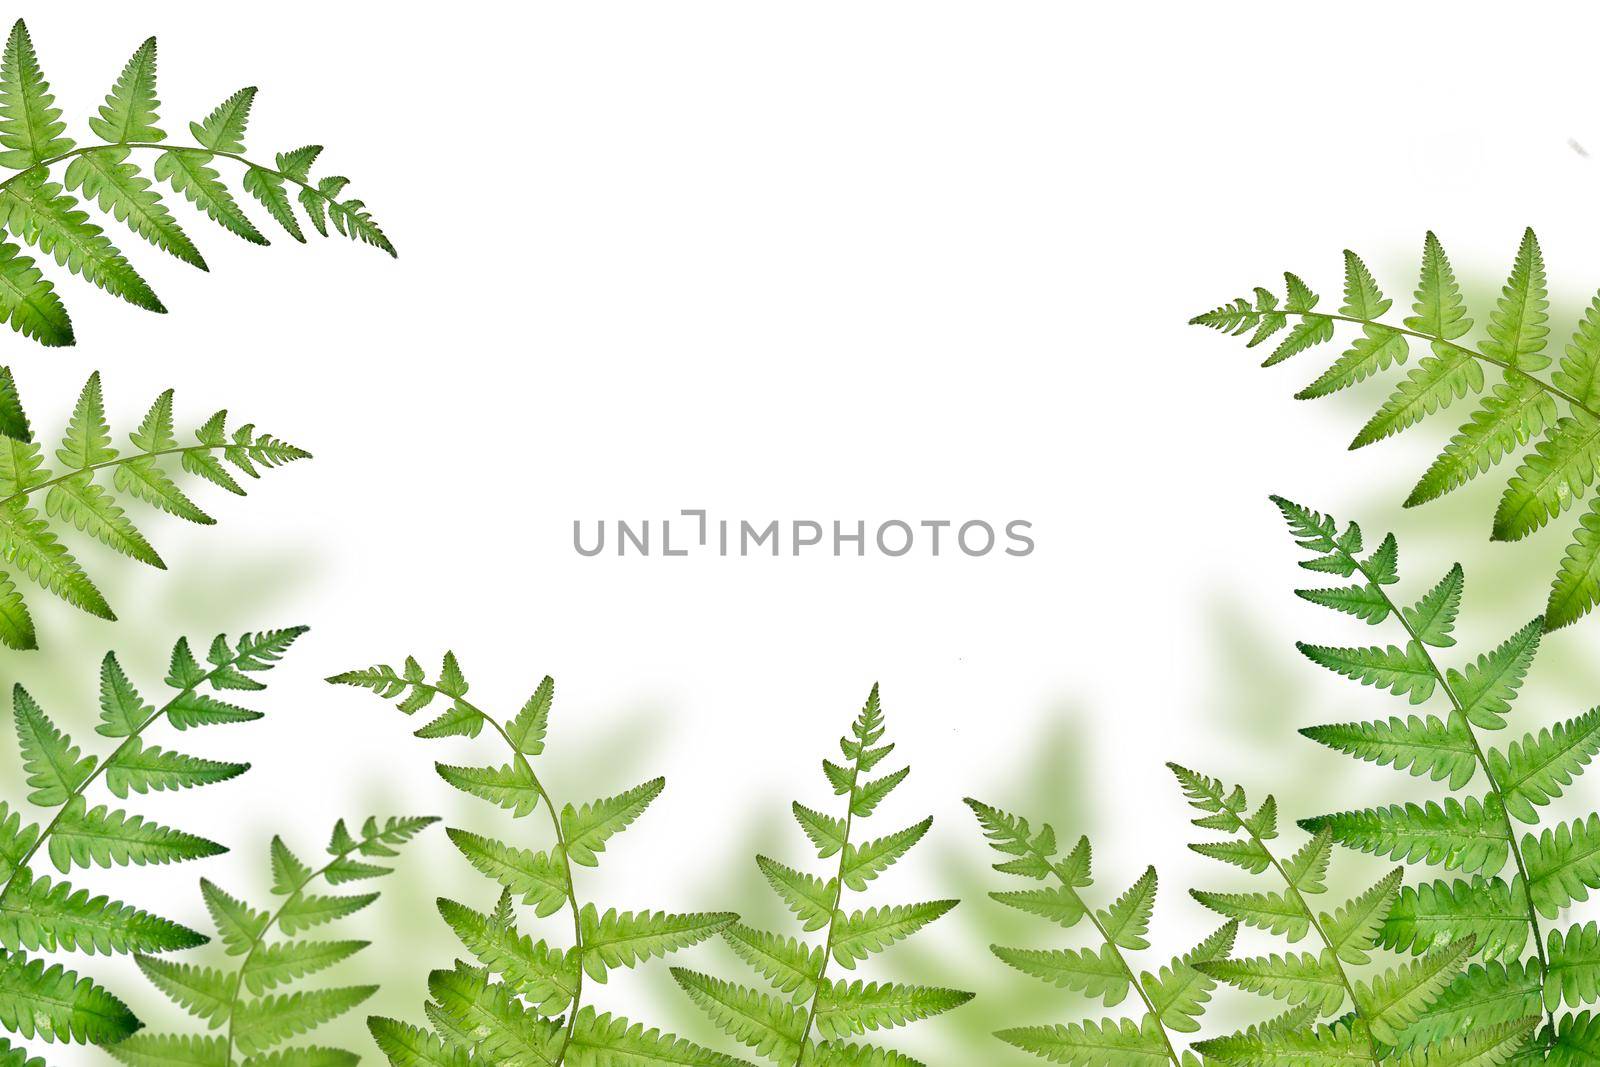 fern branches pattern isolated on white background. flat lay, top view Nature and summer concepts ideas